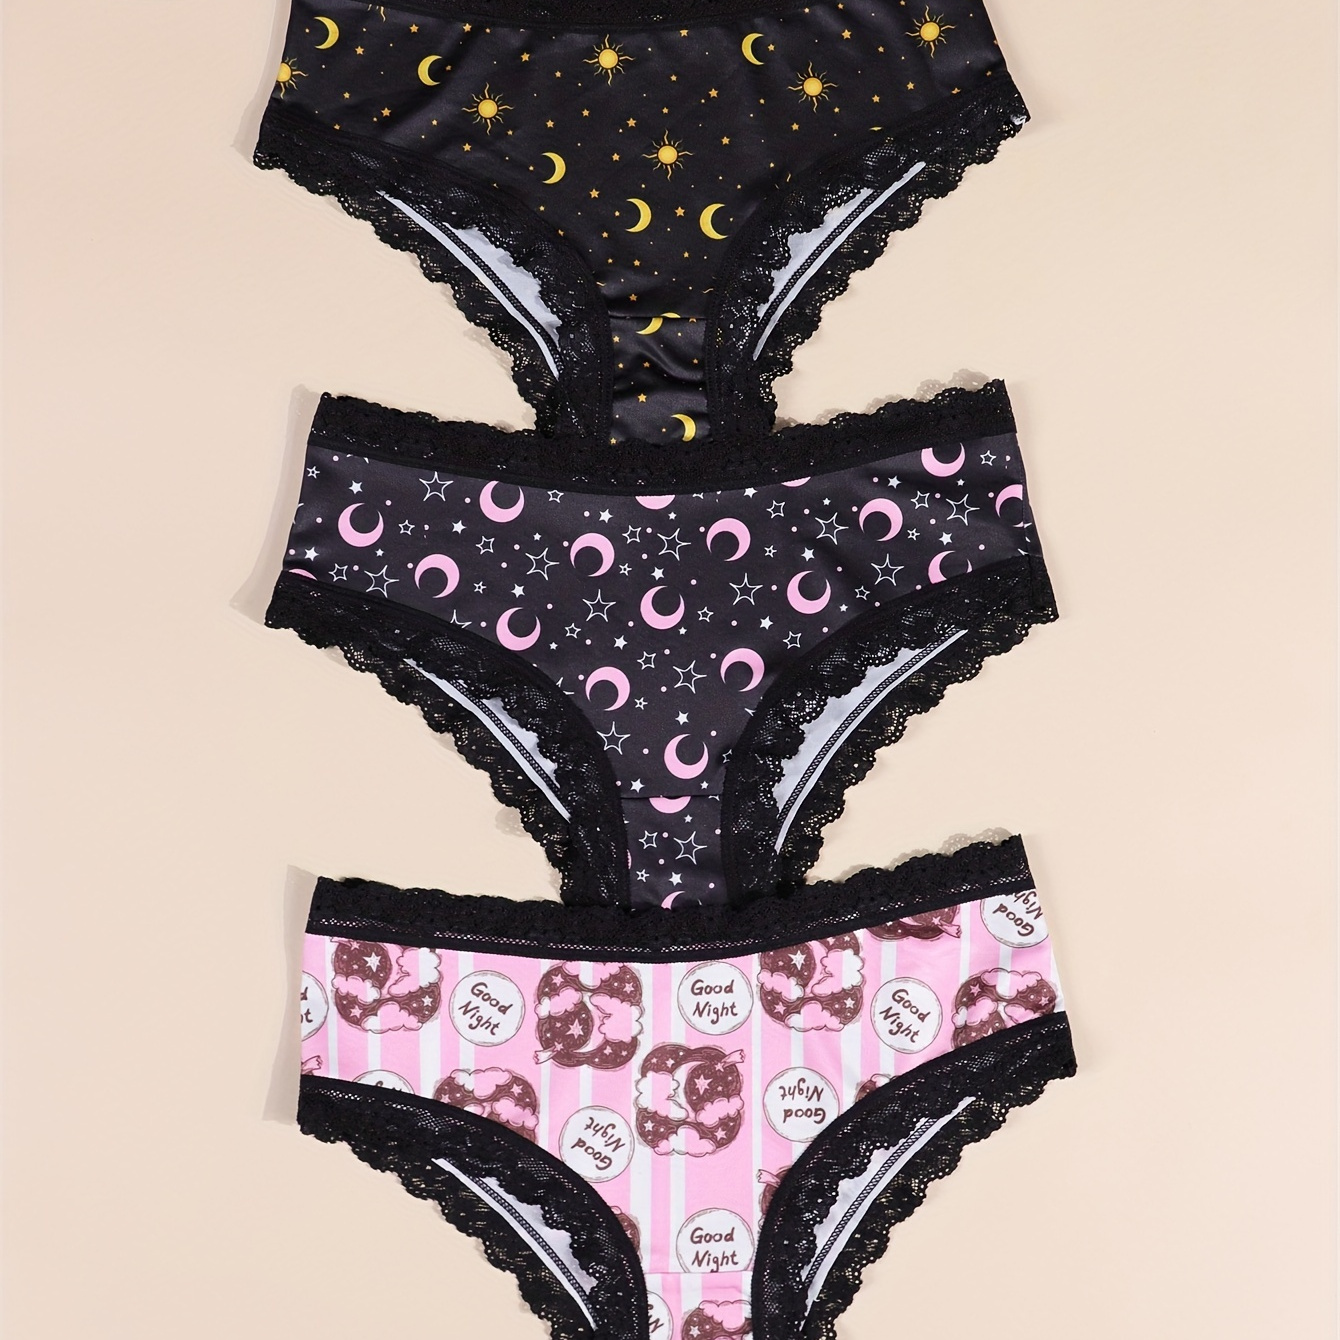 

3pcs Romantic Contrast Lace Trims Hipster Panties Set, Boho Style Allover Scattering Of Stars & Moons & Planet & Night Sky & Constellations Print Intimates Brief Panties, Women's Underwear & Lingerie